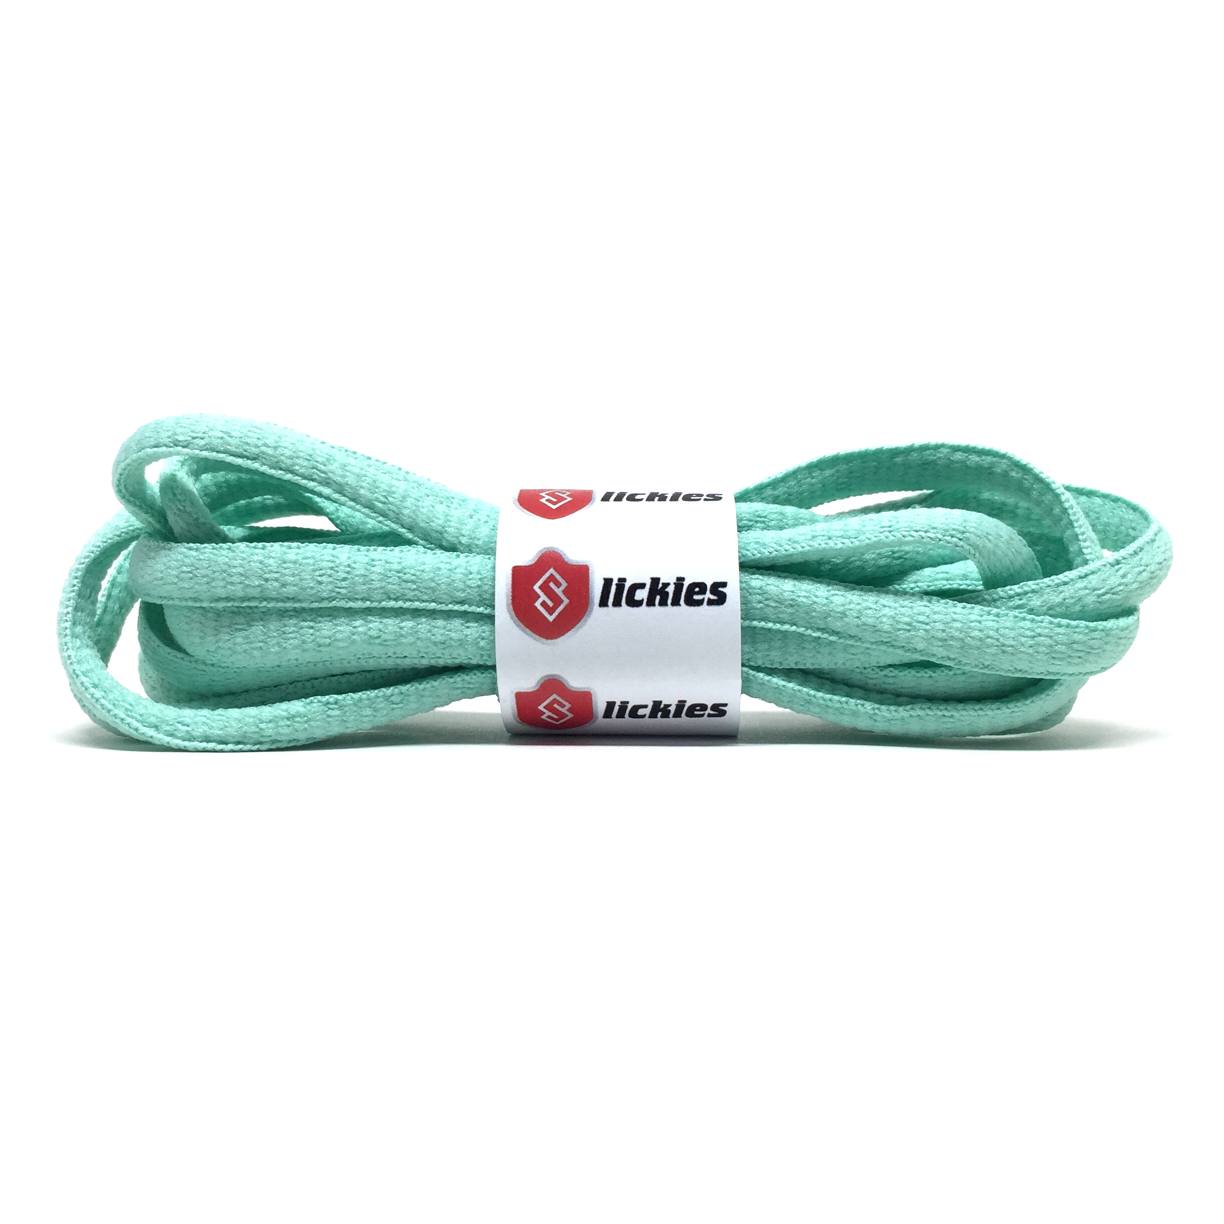 oval laces